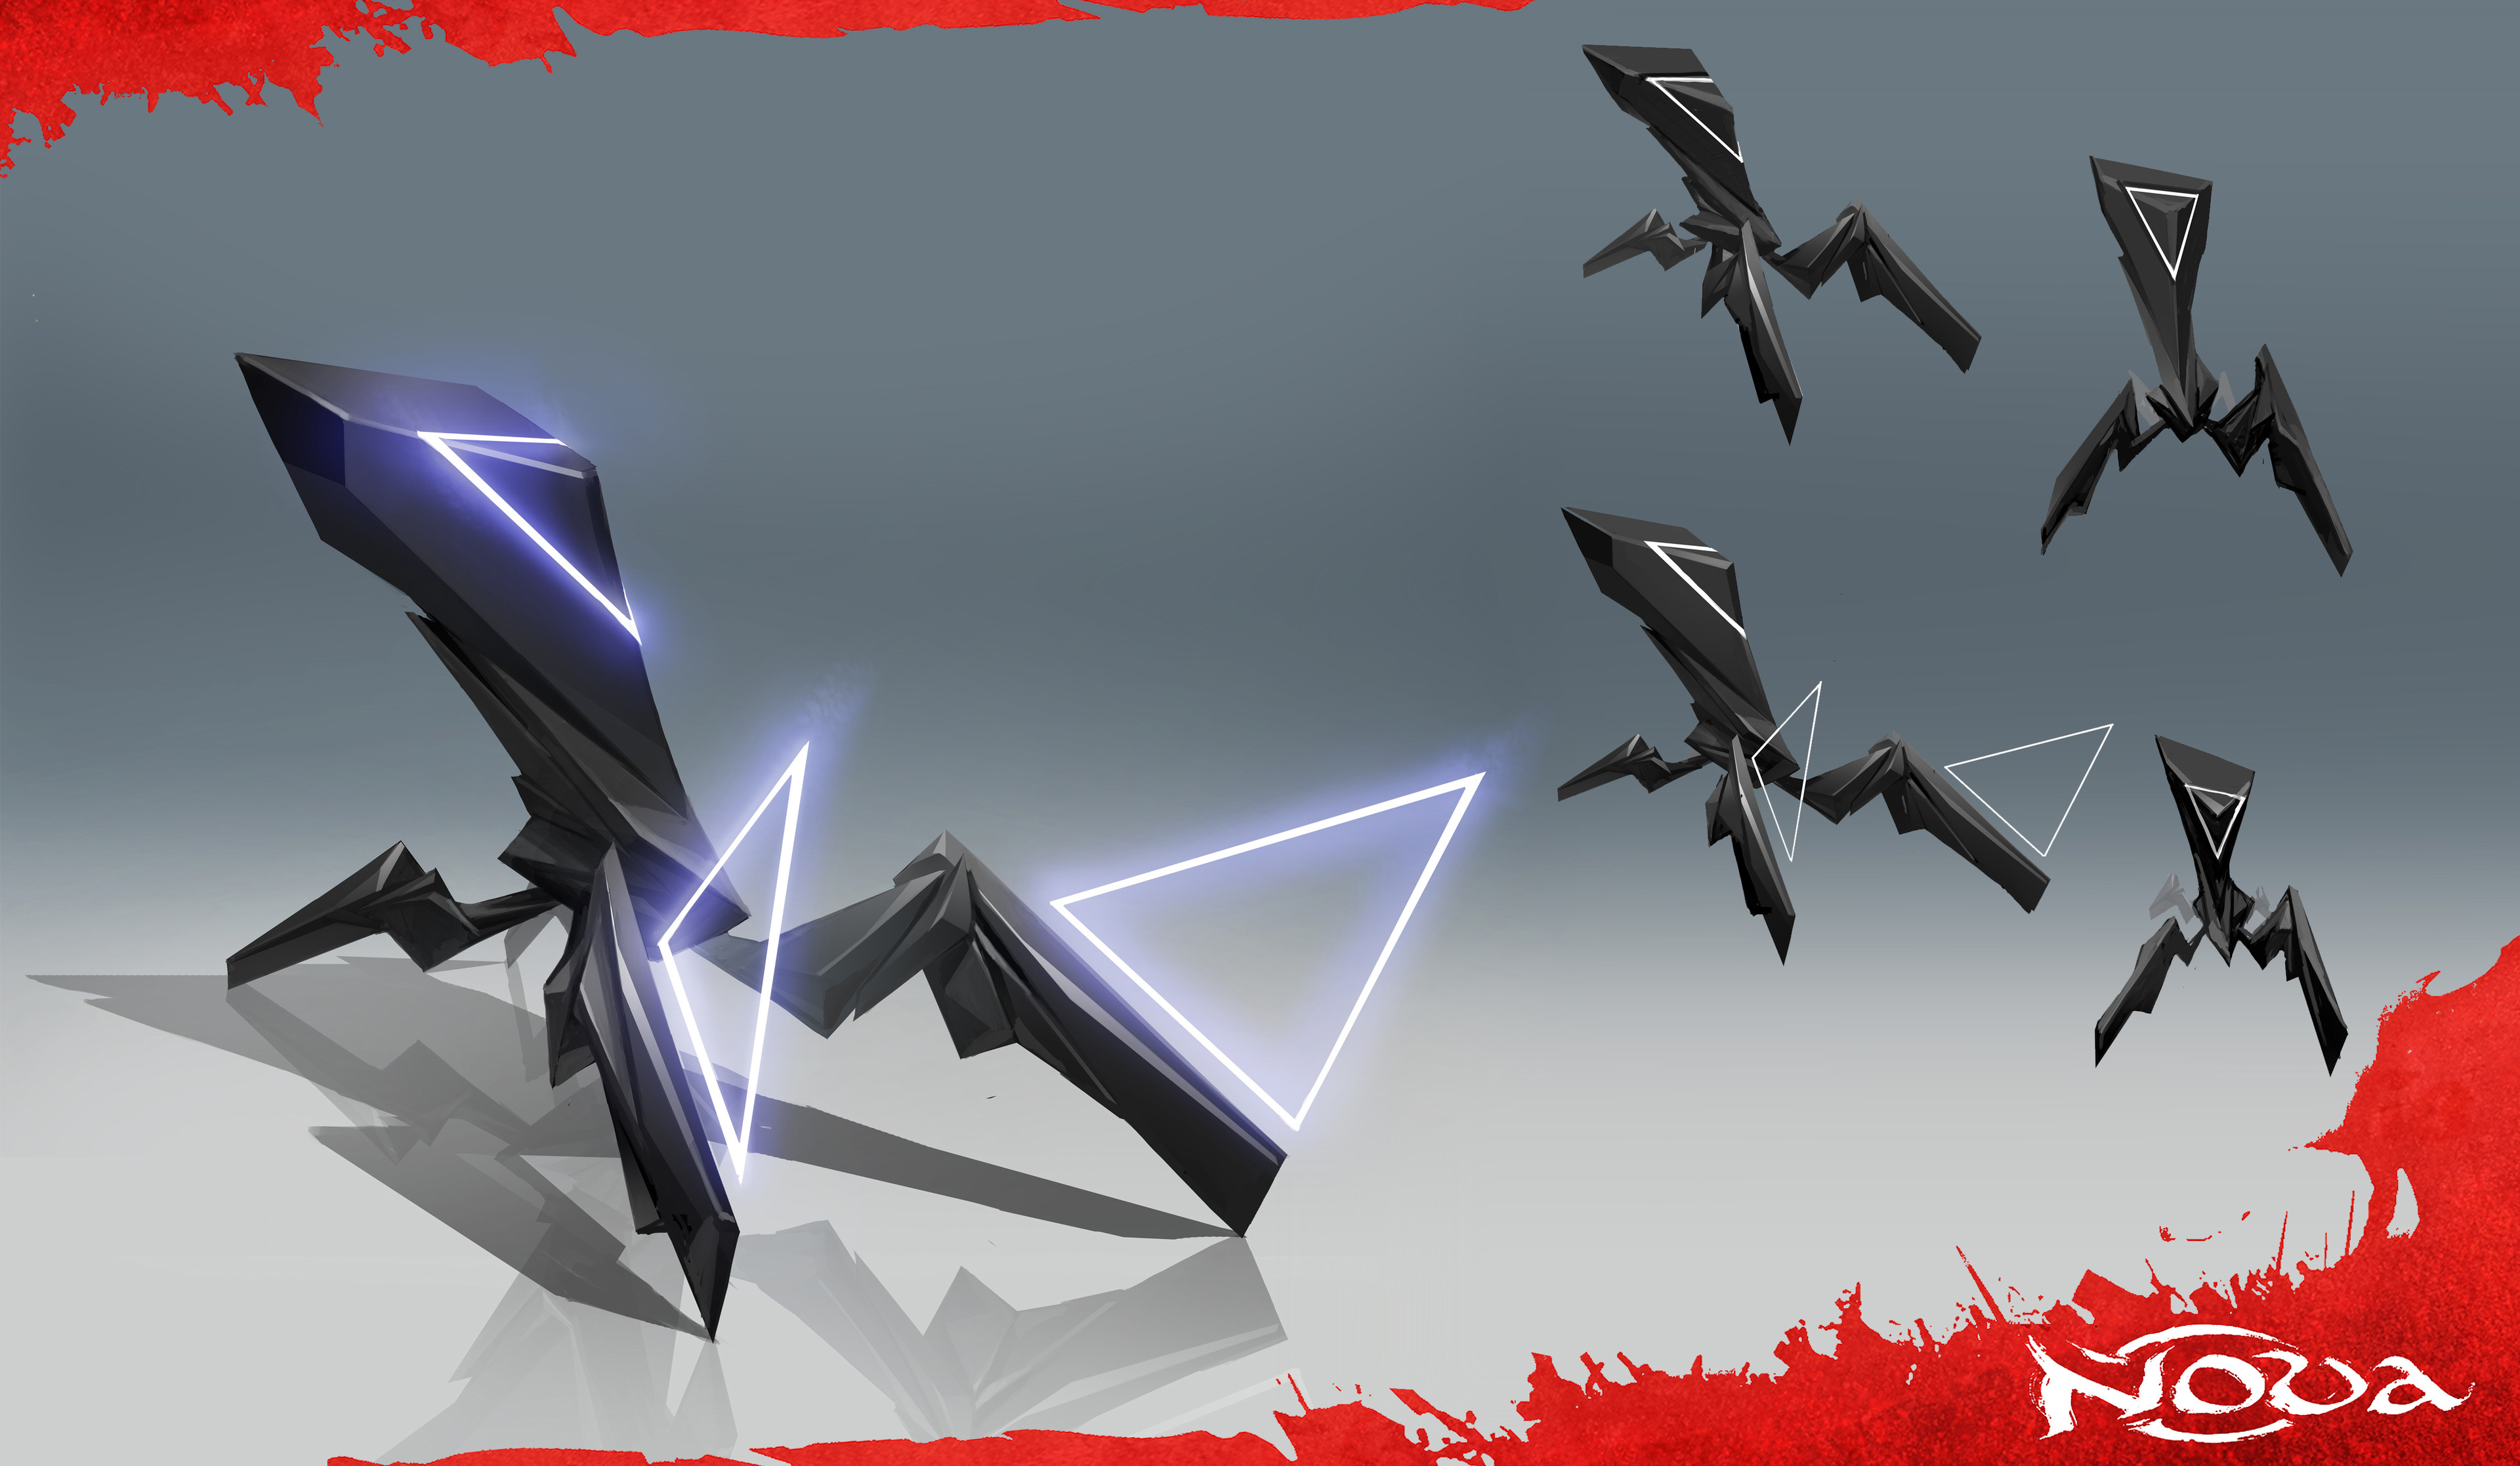 This was the first concept of the enemies of the world, The Daxx. You would fight these while battling other players. I wanted them to feel super advanced and out of place in this world. This was a drone.